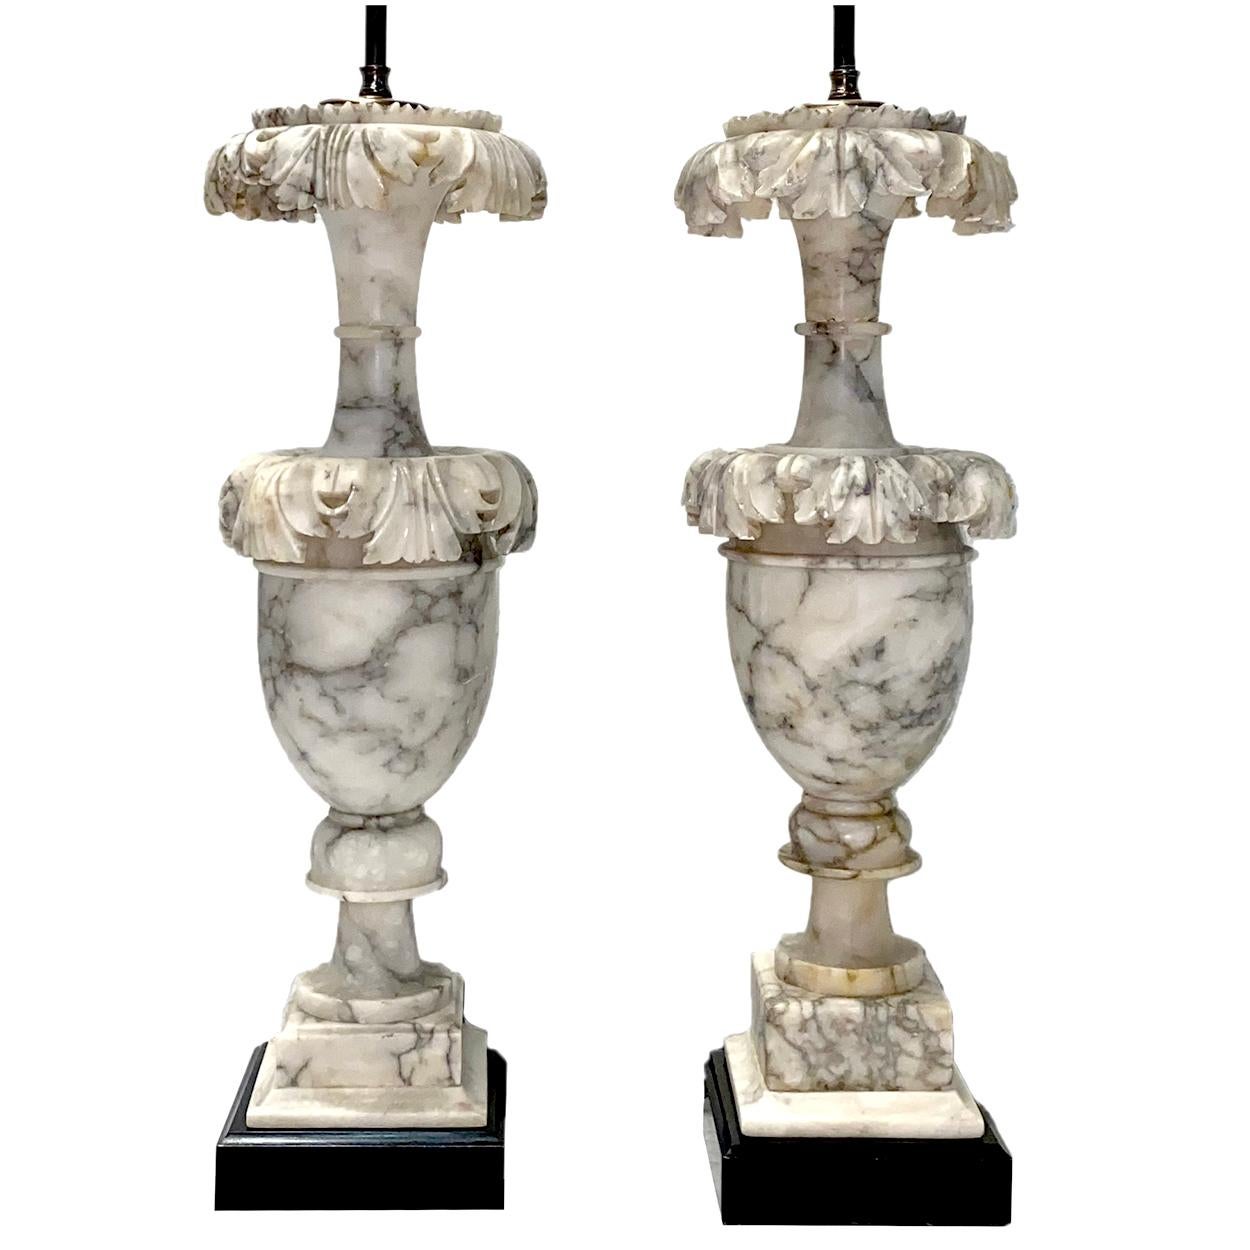 Pair of circa 1920s Italian carved gray alabaster lamps with dark veining and foliage motif on body as well as square pedestal bases.

Measurements:
Height of body 22